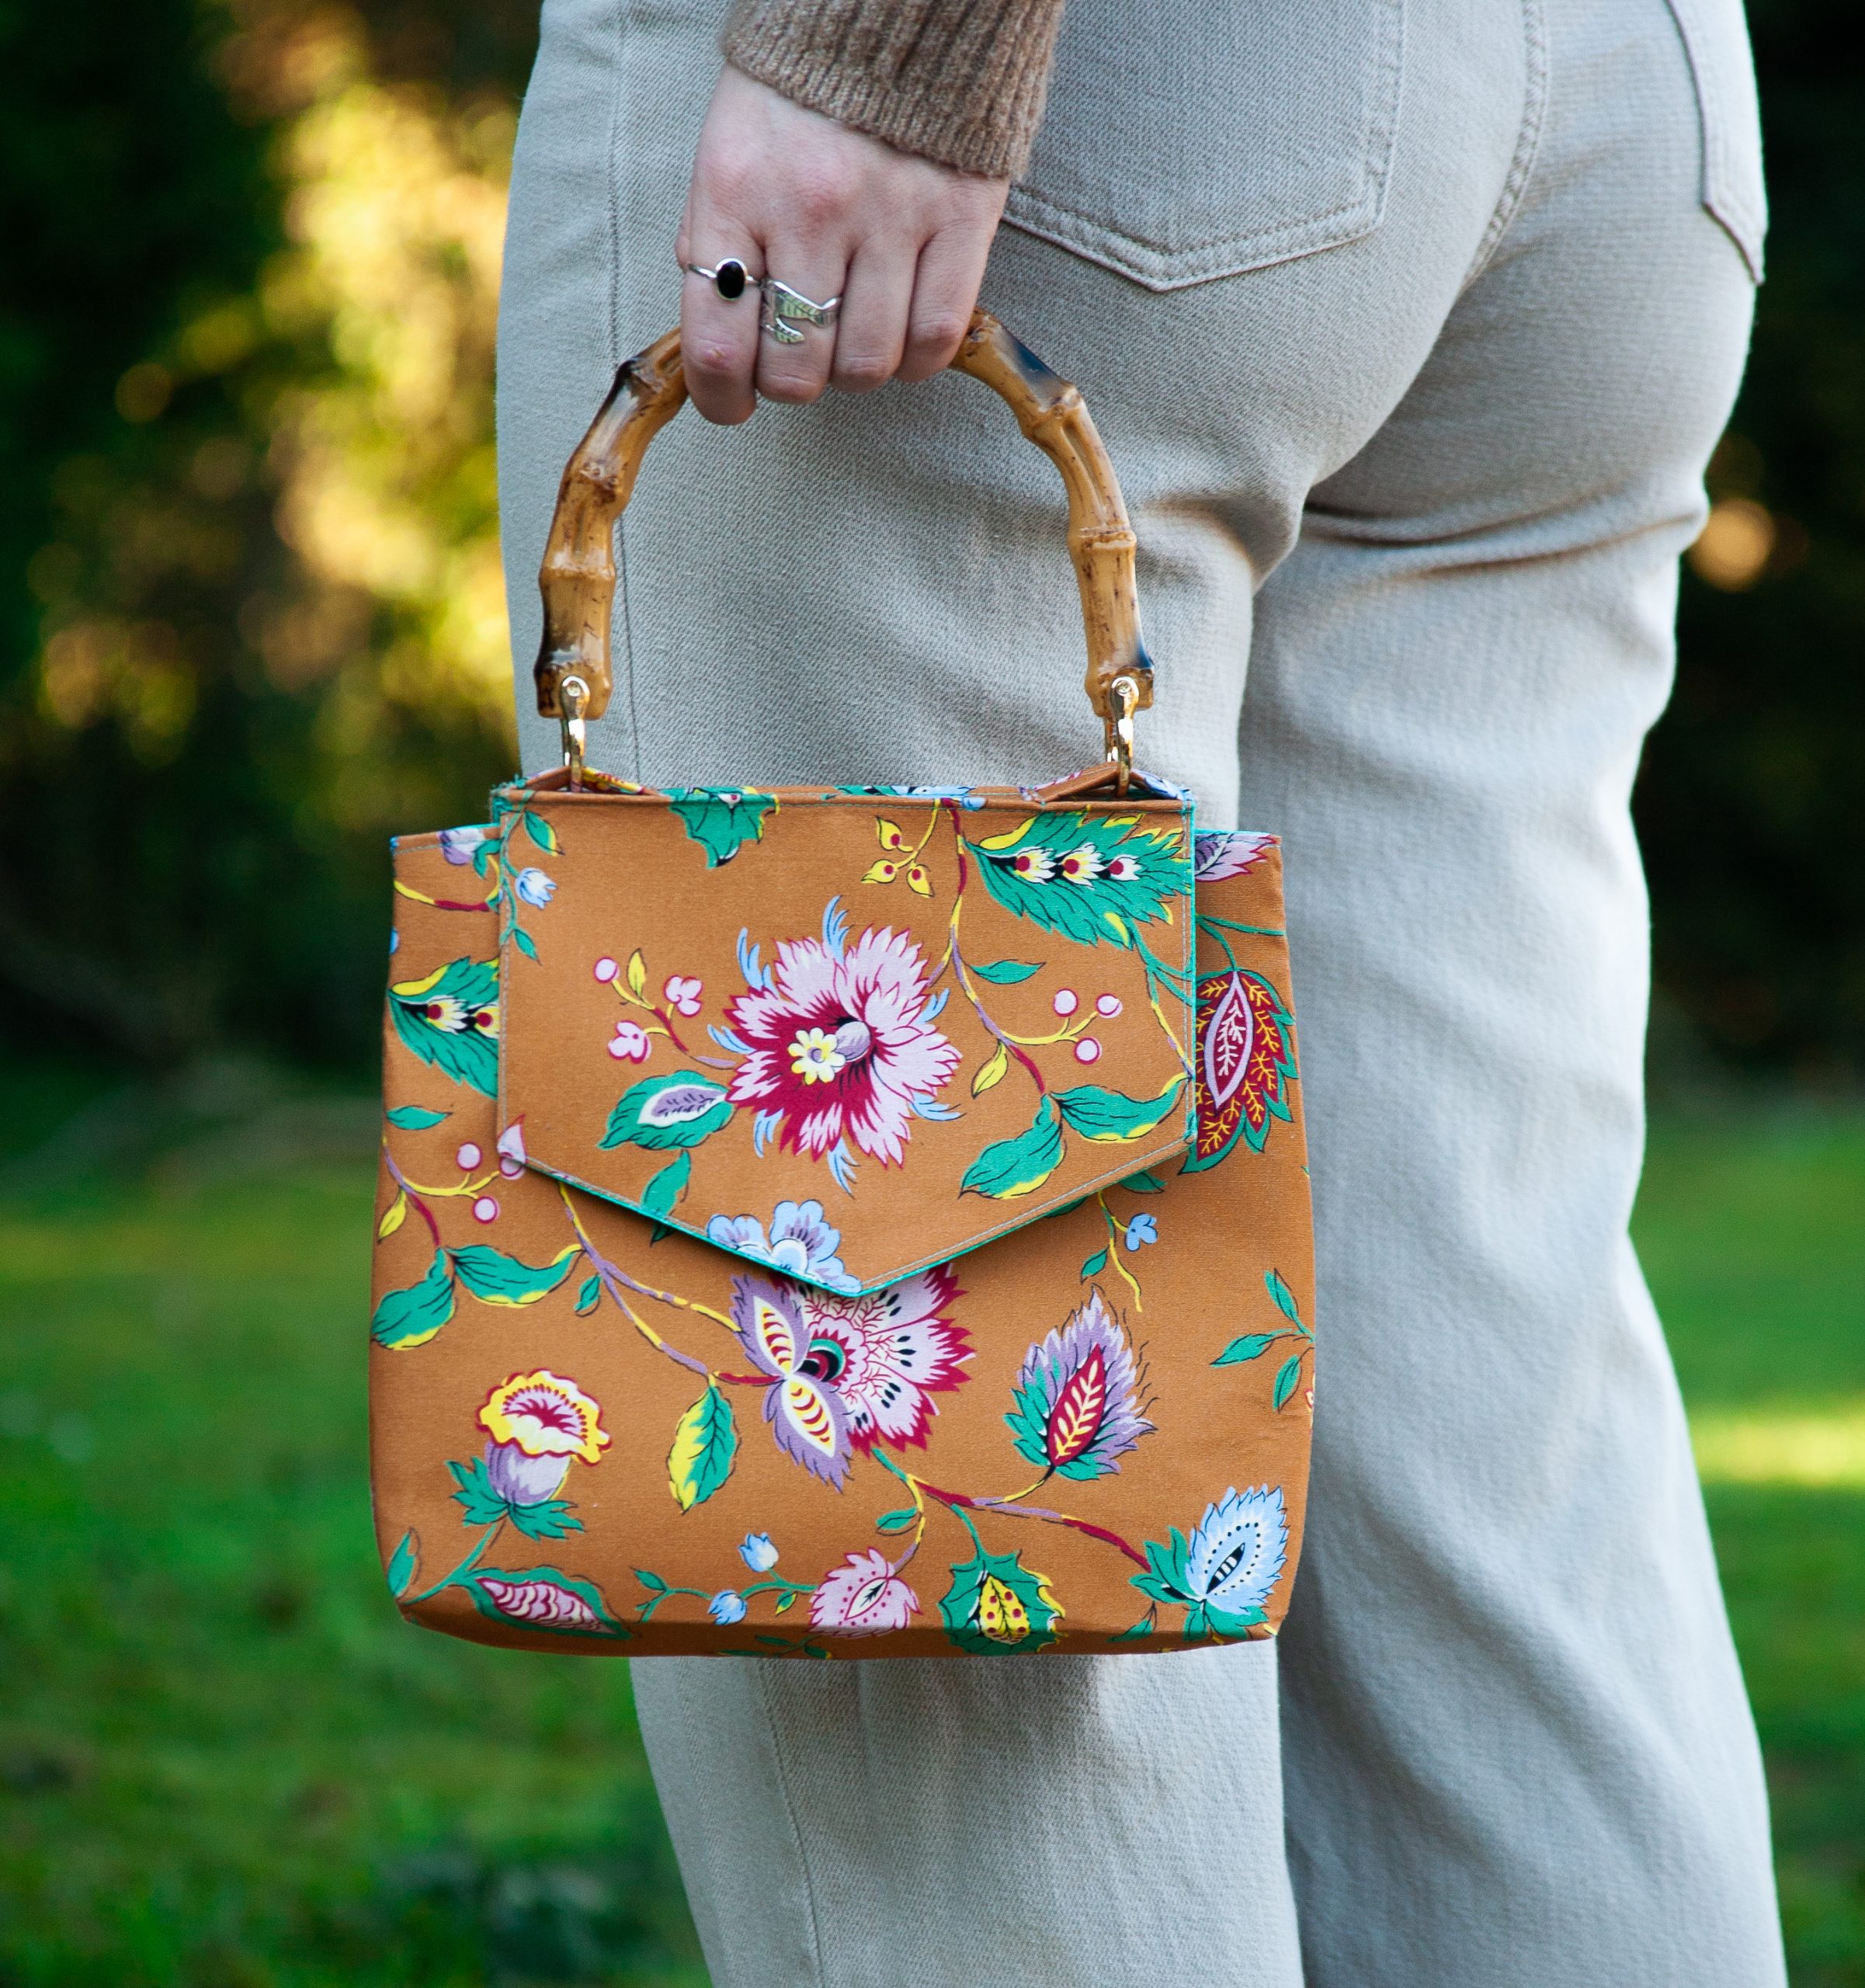 Small Square Bag Instructions and Pattern - Download – Debbie Shore Sewing